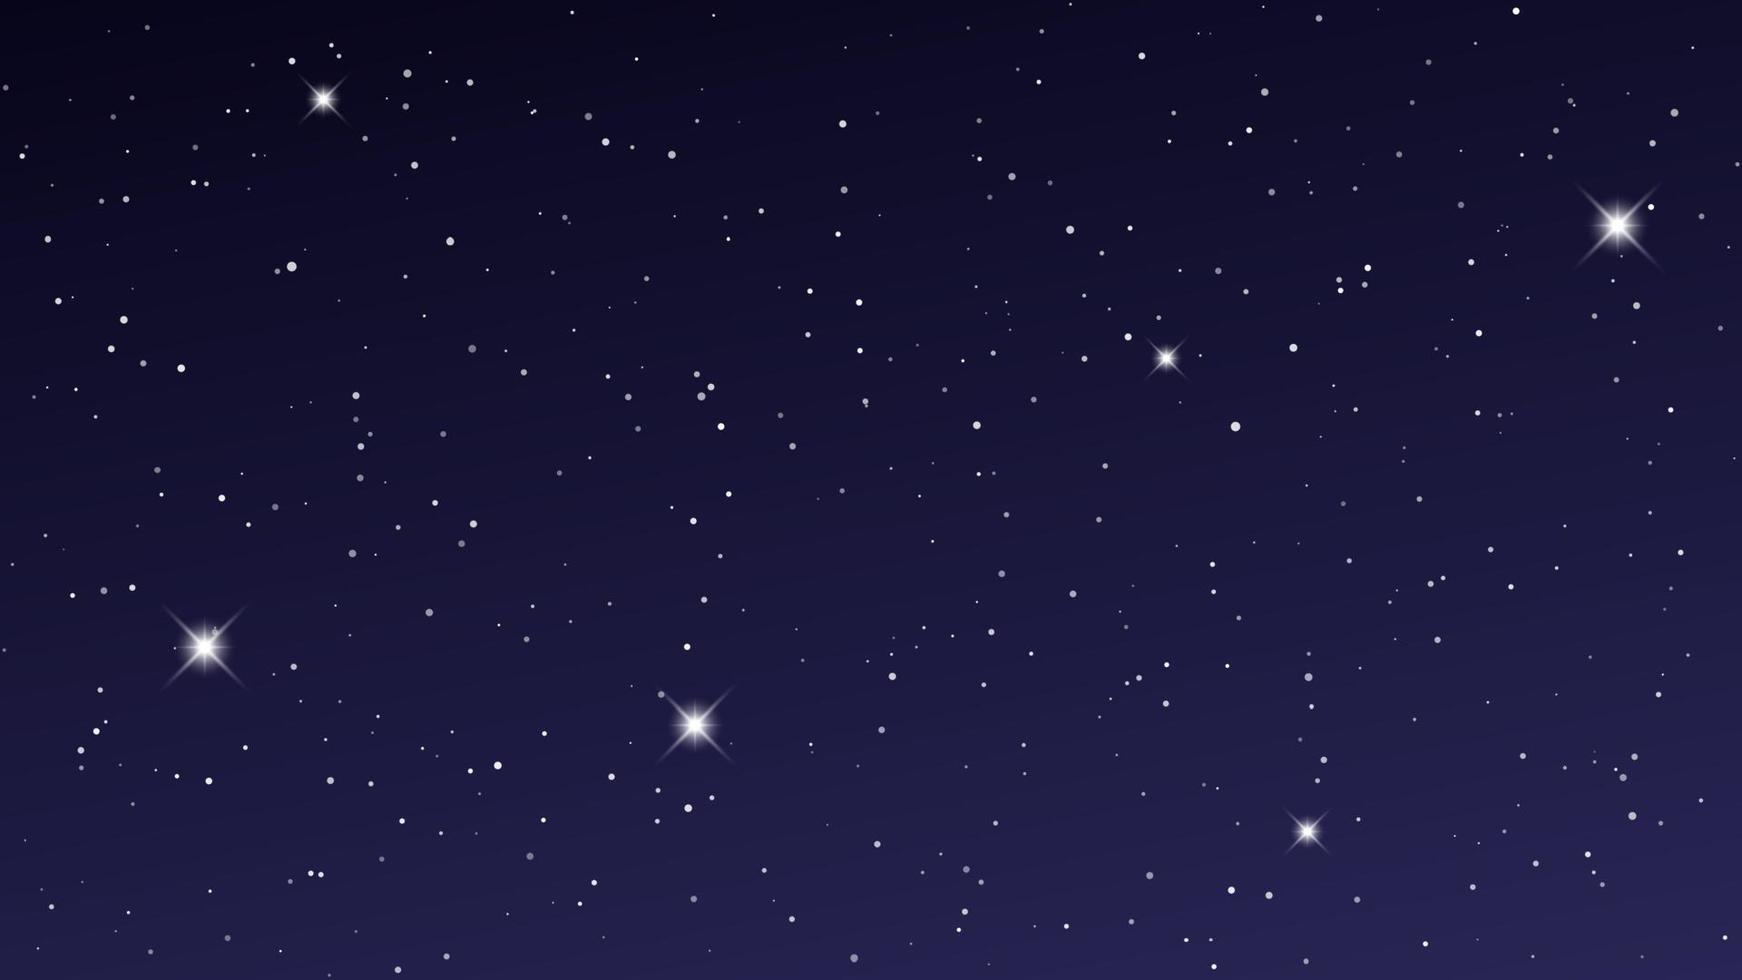 Night sky with many stars. Abstract nature background with stardust in deep universe. Vector illustration.